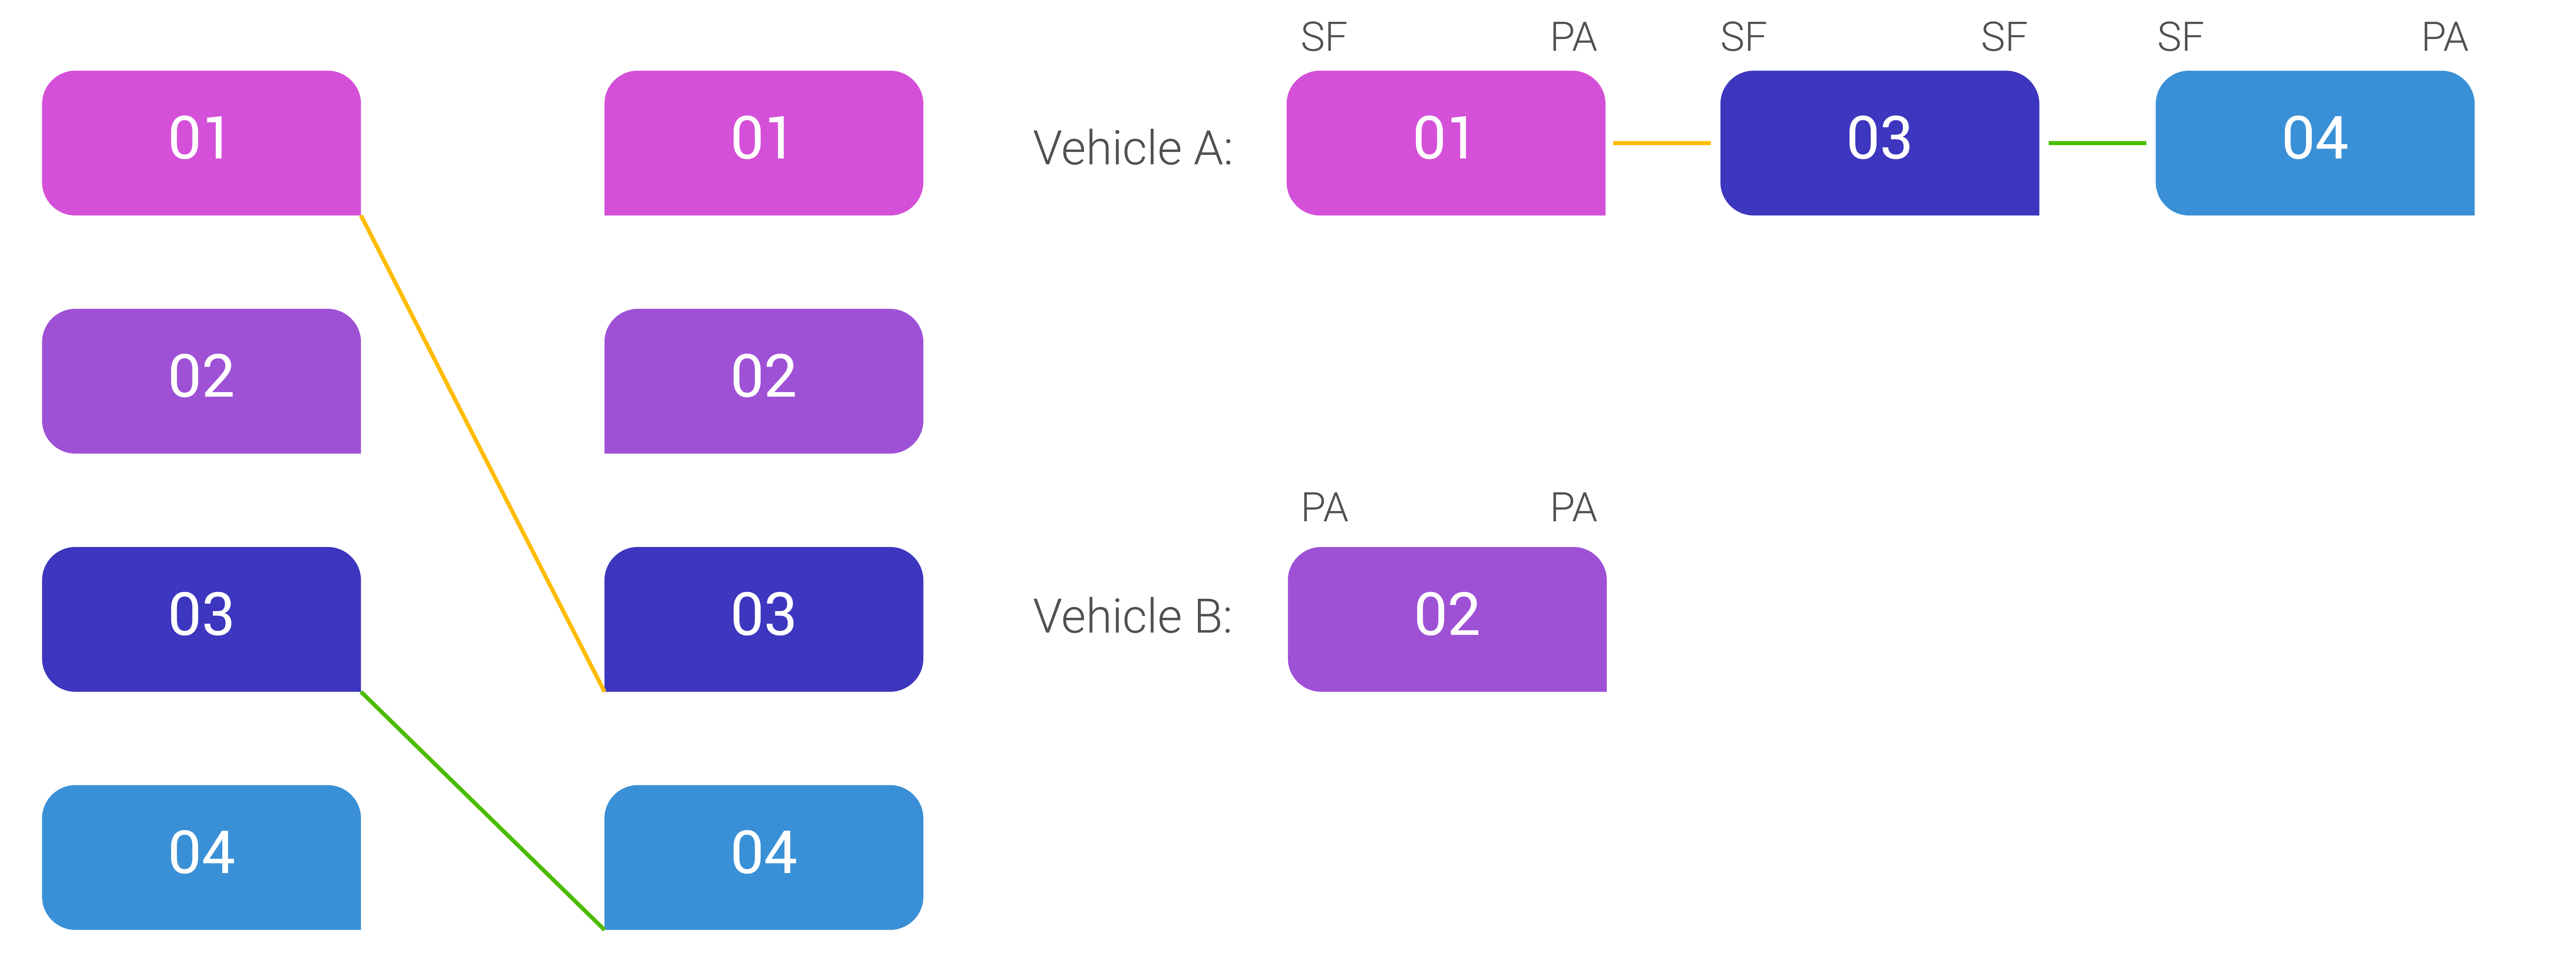 optimize vehicle scheduling